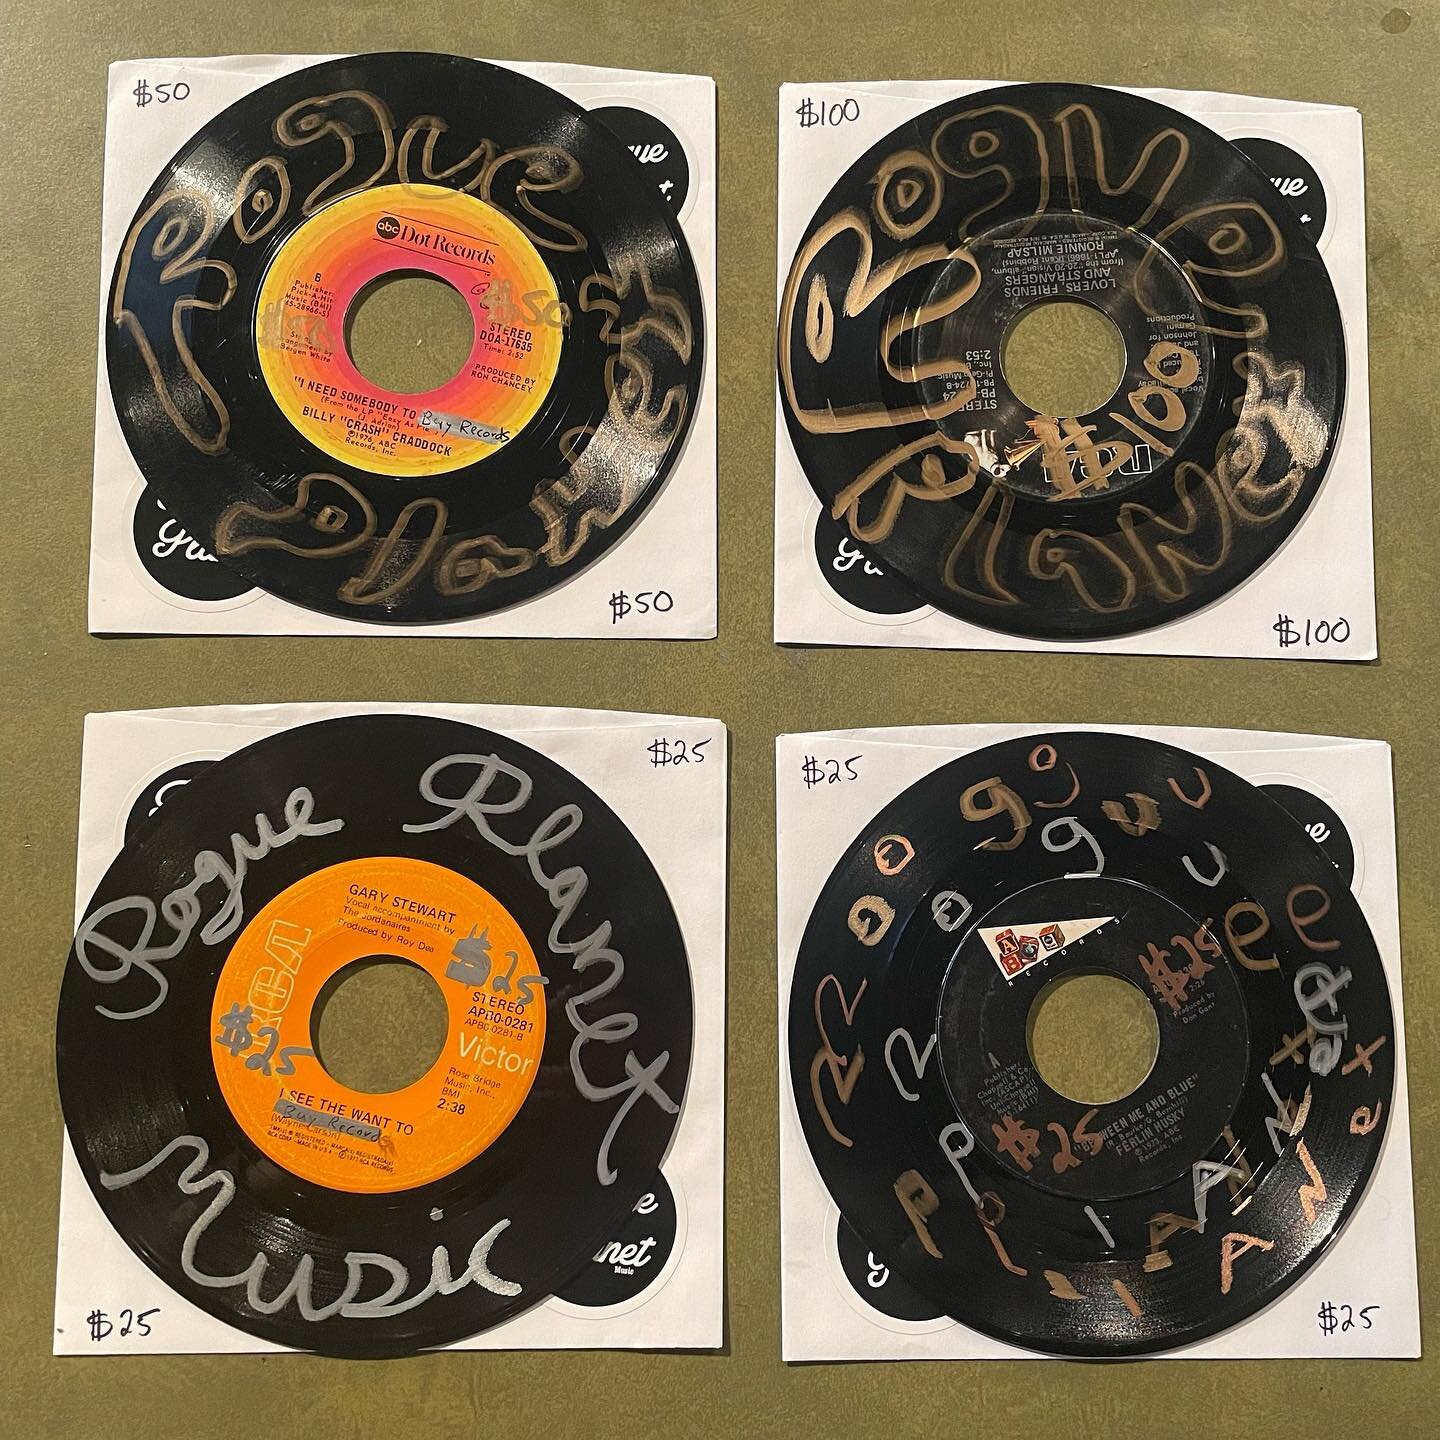 Making Gift Cards today! Double sided designs on upcycled 45s. We also have E gift cards available (DM to request link!) #upcycling #giftcertificatesavailable #45rpm #desmoines #dsmia #paintmarkers #lettering